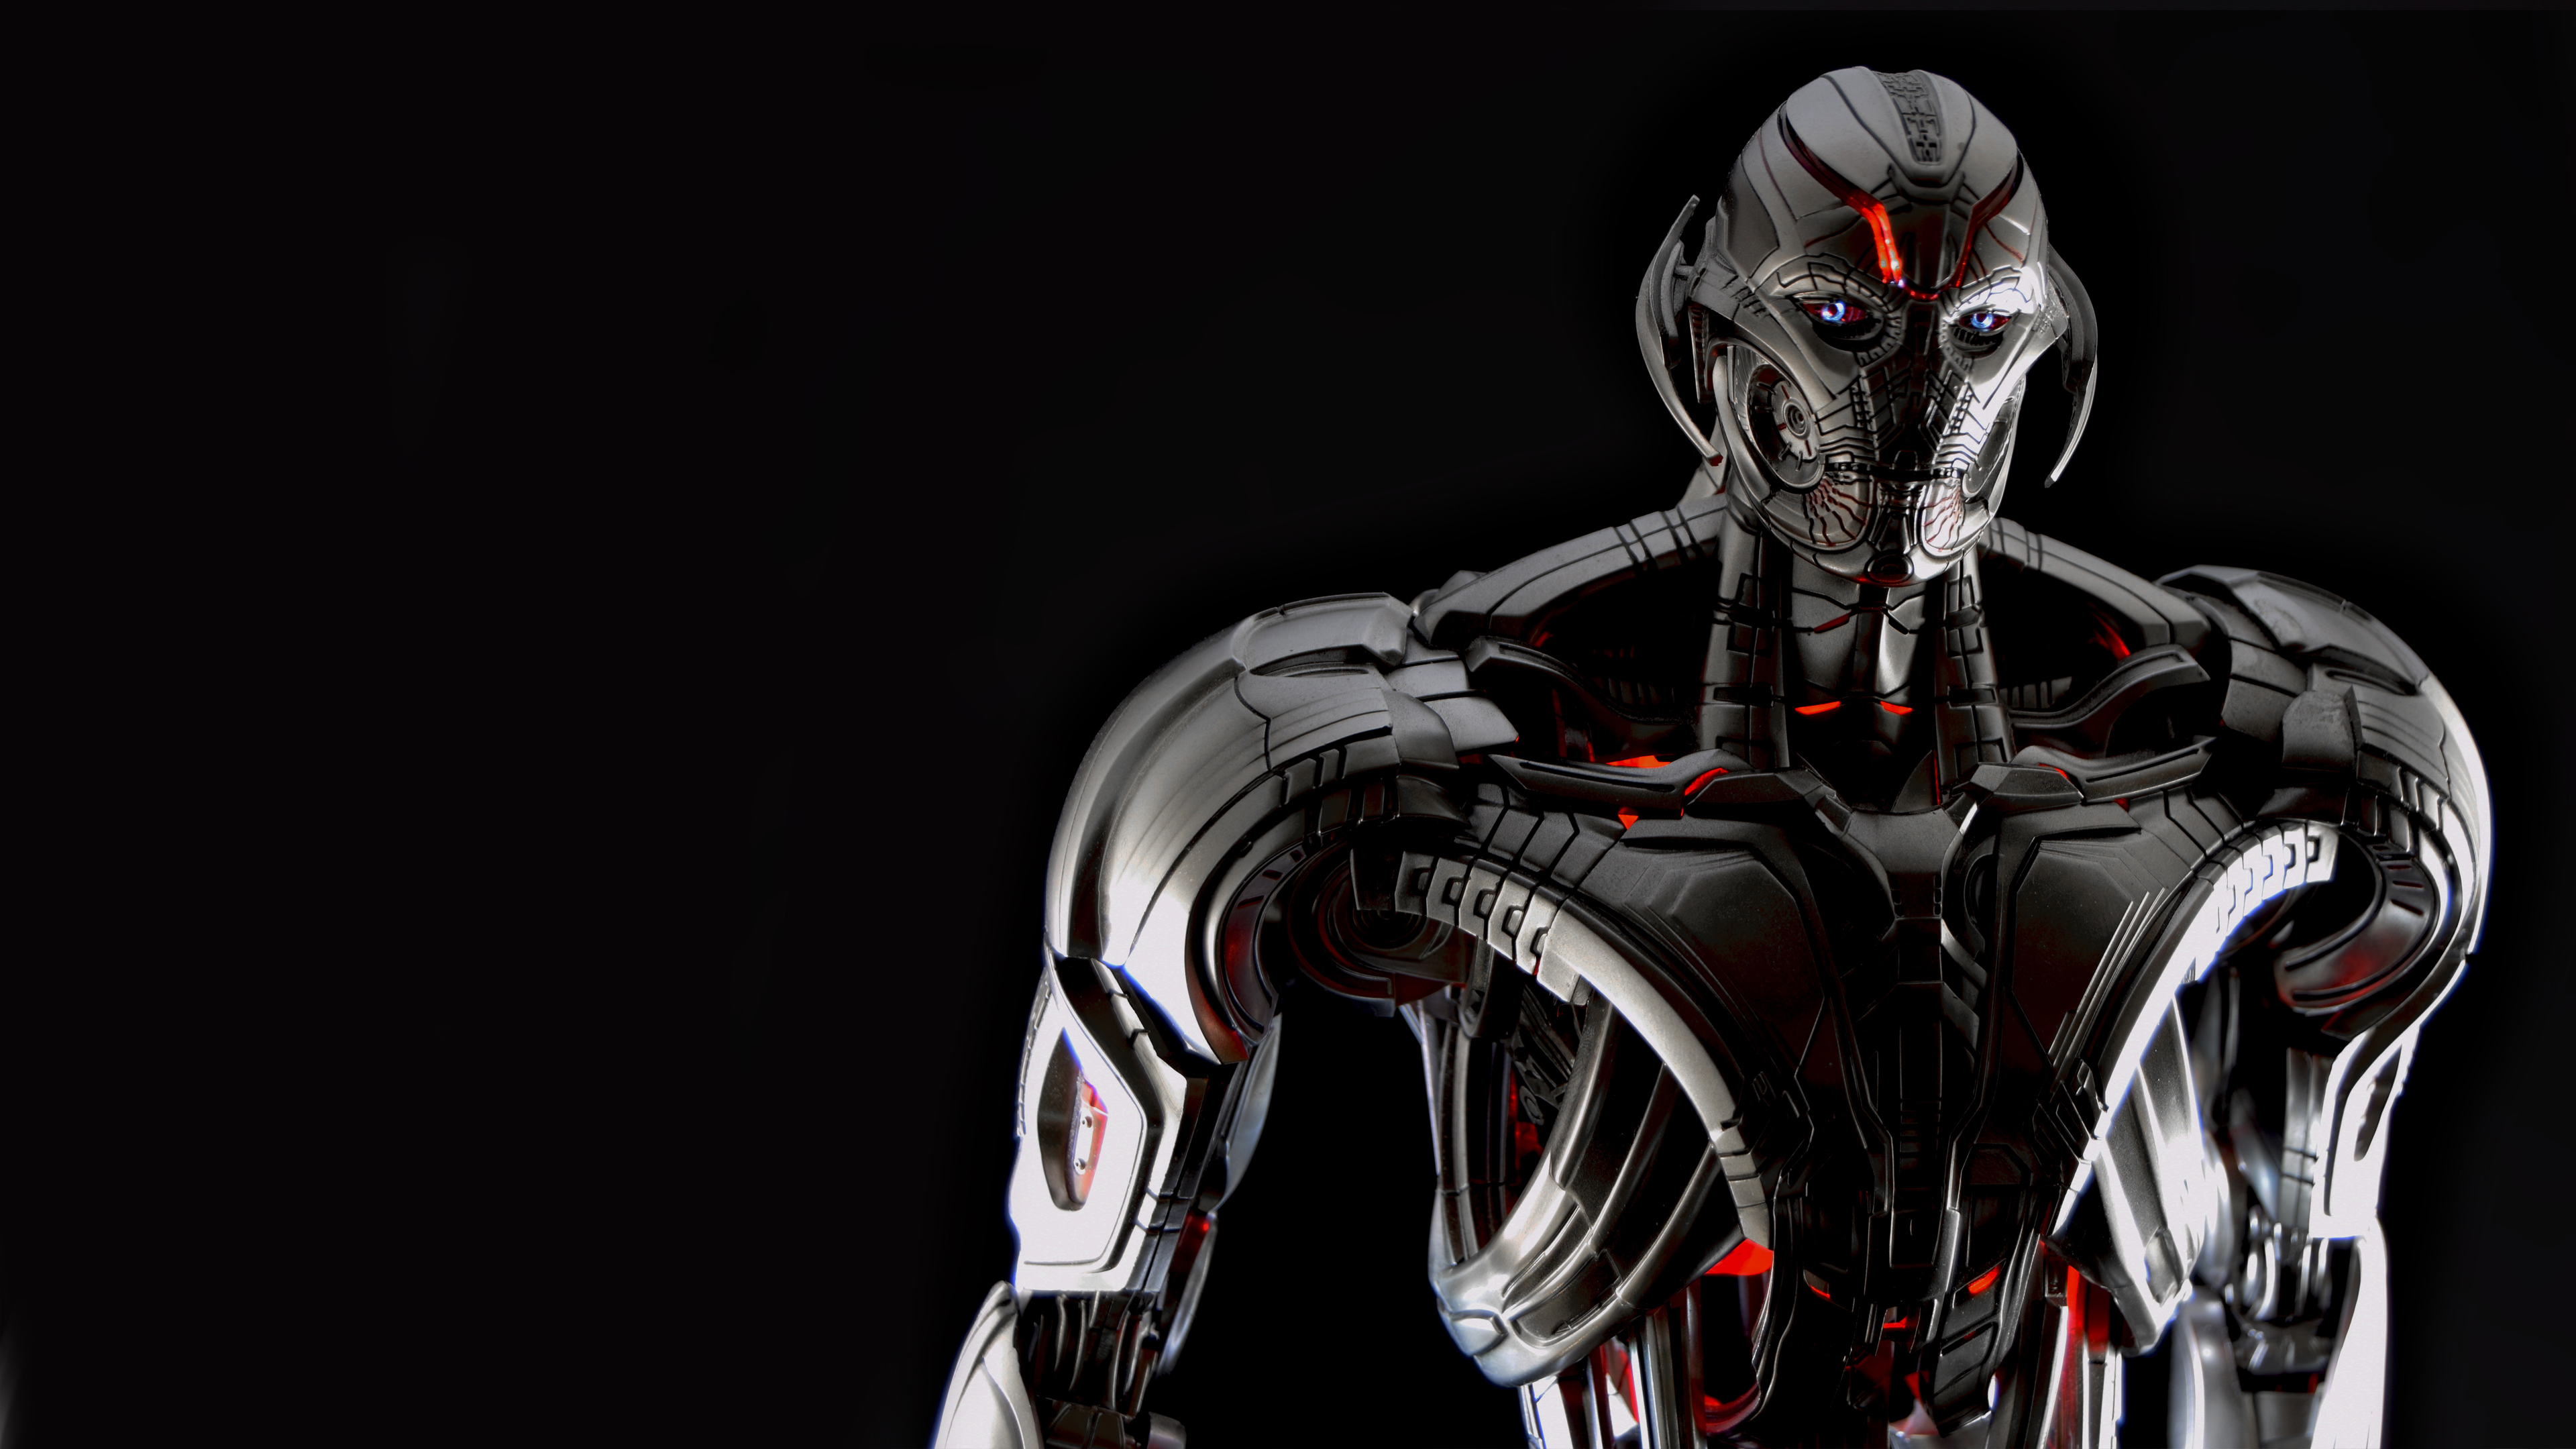 Toy Ultron Avengers Age Of Ultron Figurine 3840x2160